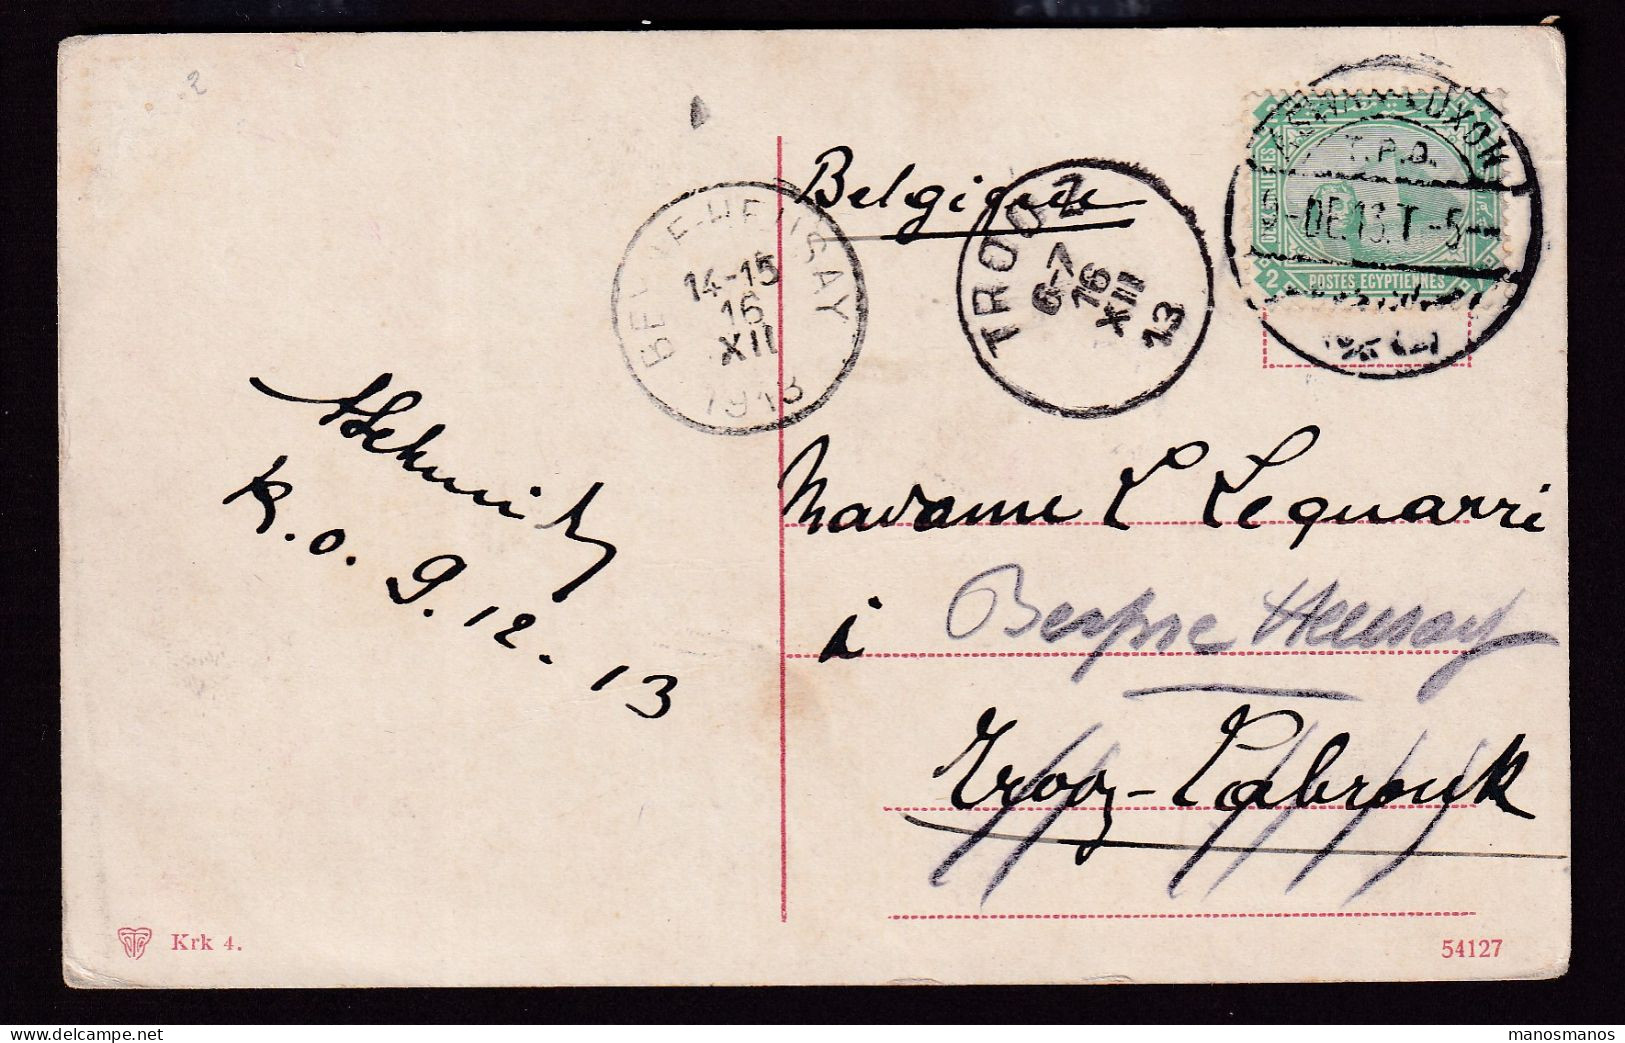 387/31 -- EGYPT ASWAN-LUXOR TPO (in Small Letters) - SCARCE Type  - Viewcard Cancelled 1913 To TROOZ Belgium - 1866-1914 Khédivat D'Égypte